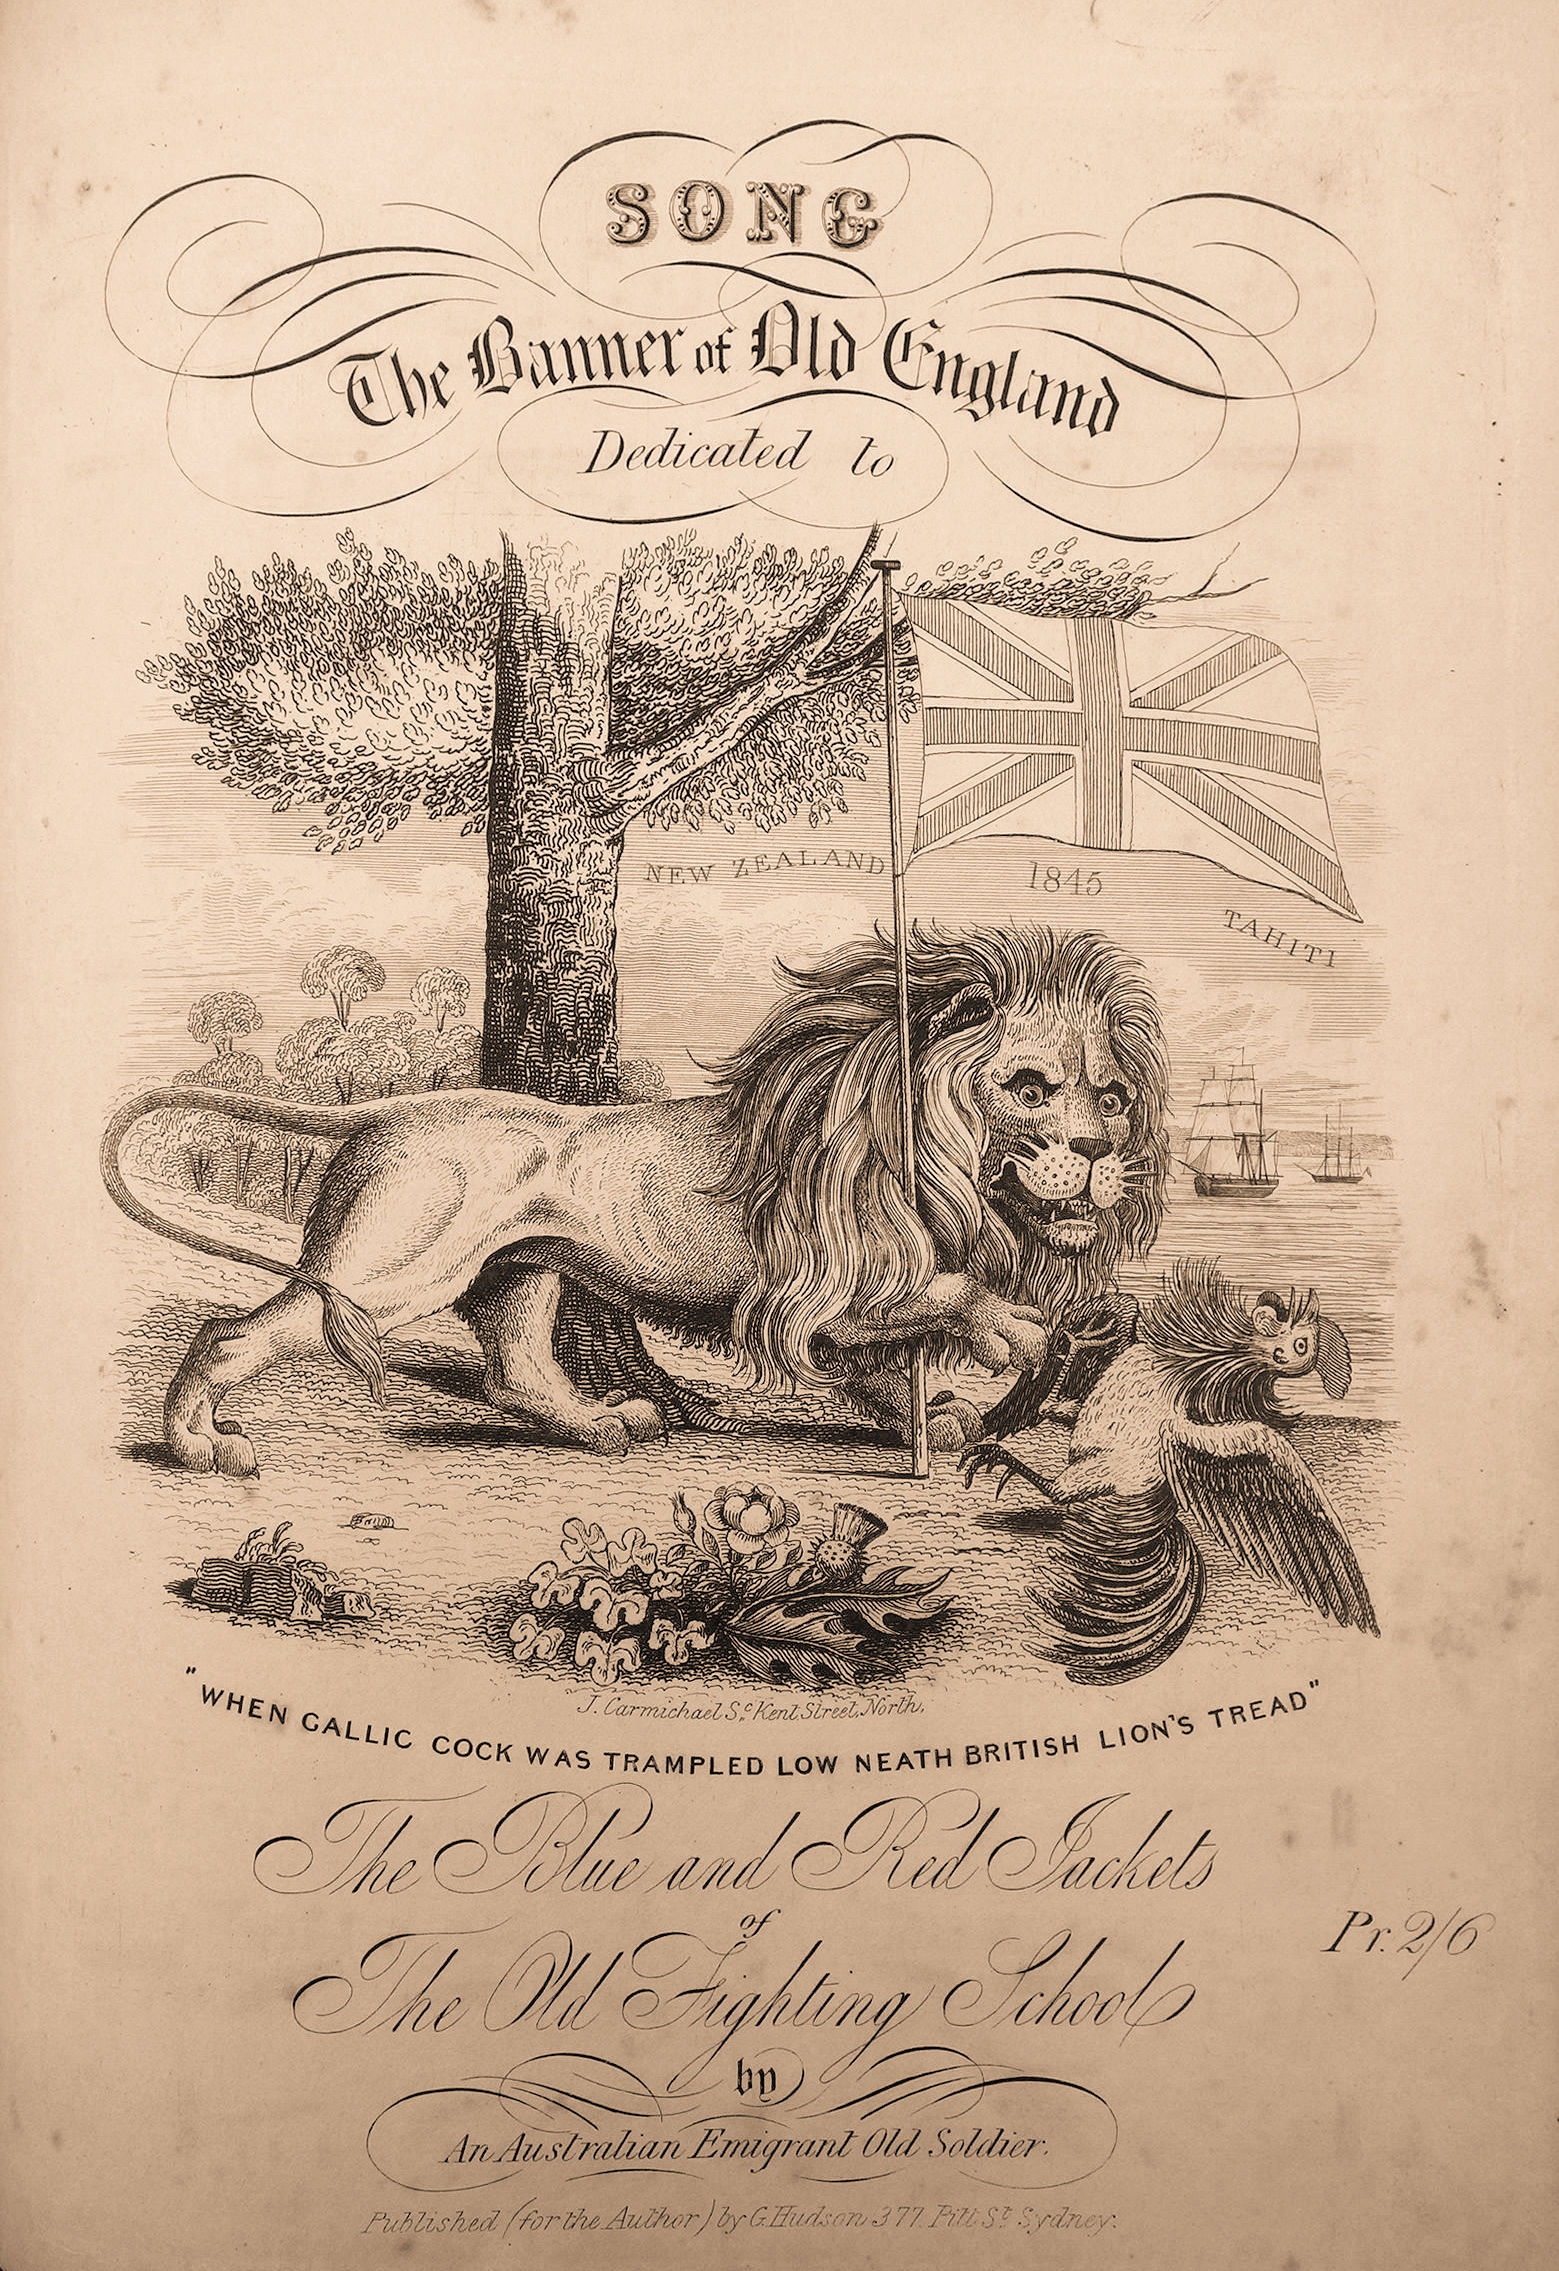 The banner of old England, by Charles Nagel; cover engraving by John Carmichael (Sydney: George Hudson, [1845])